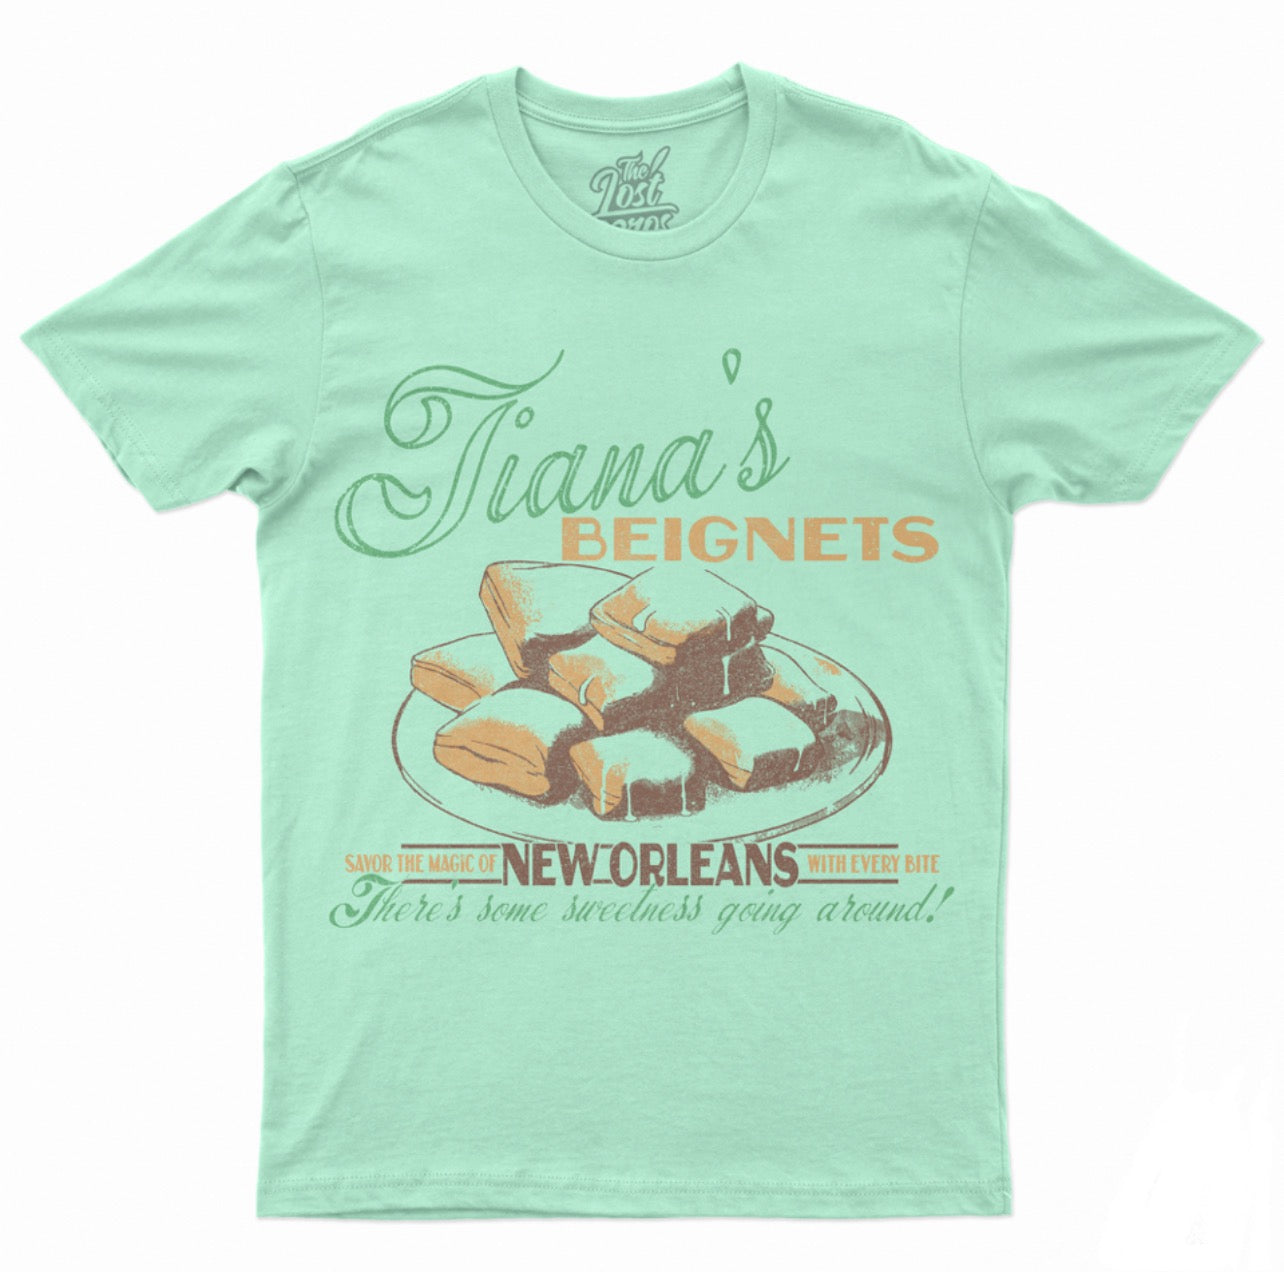 the lost bros tianas beignets tee front only